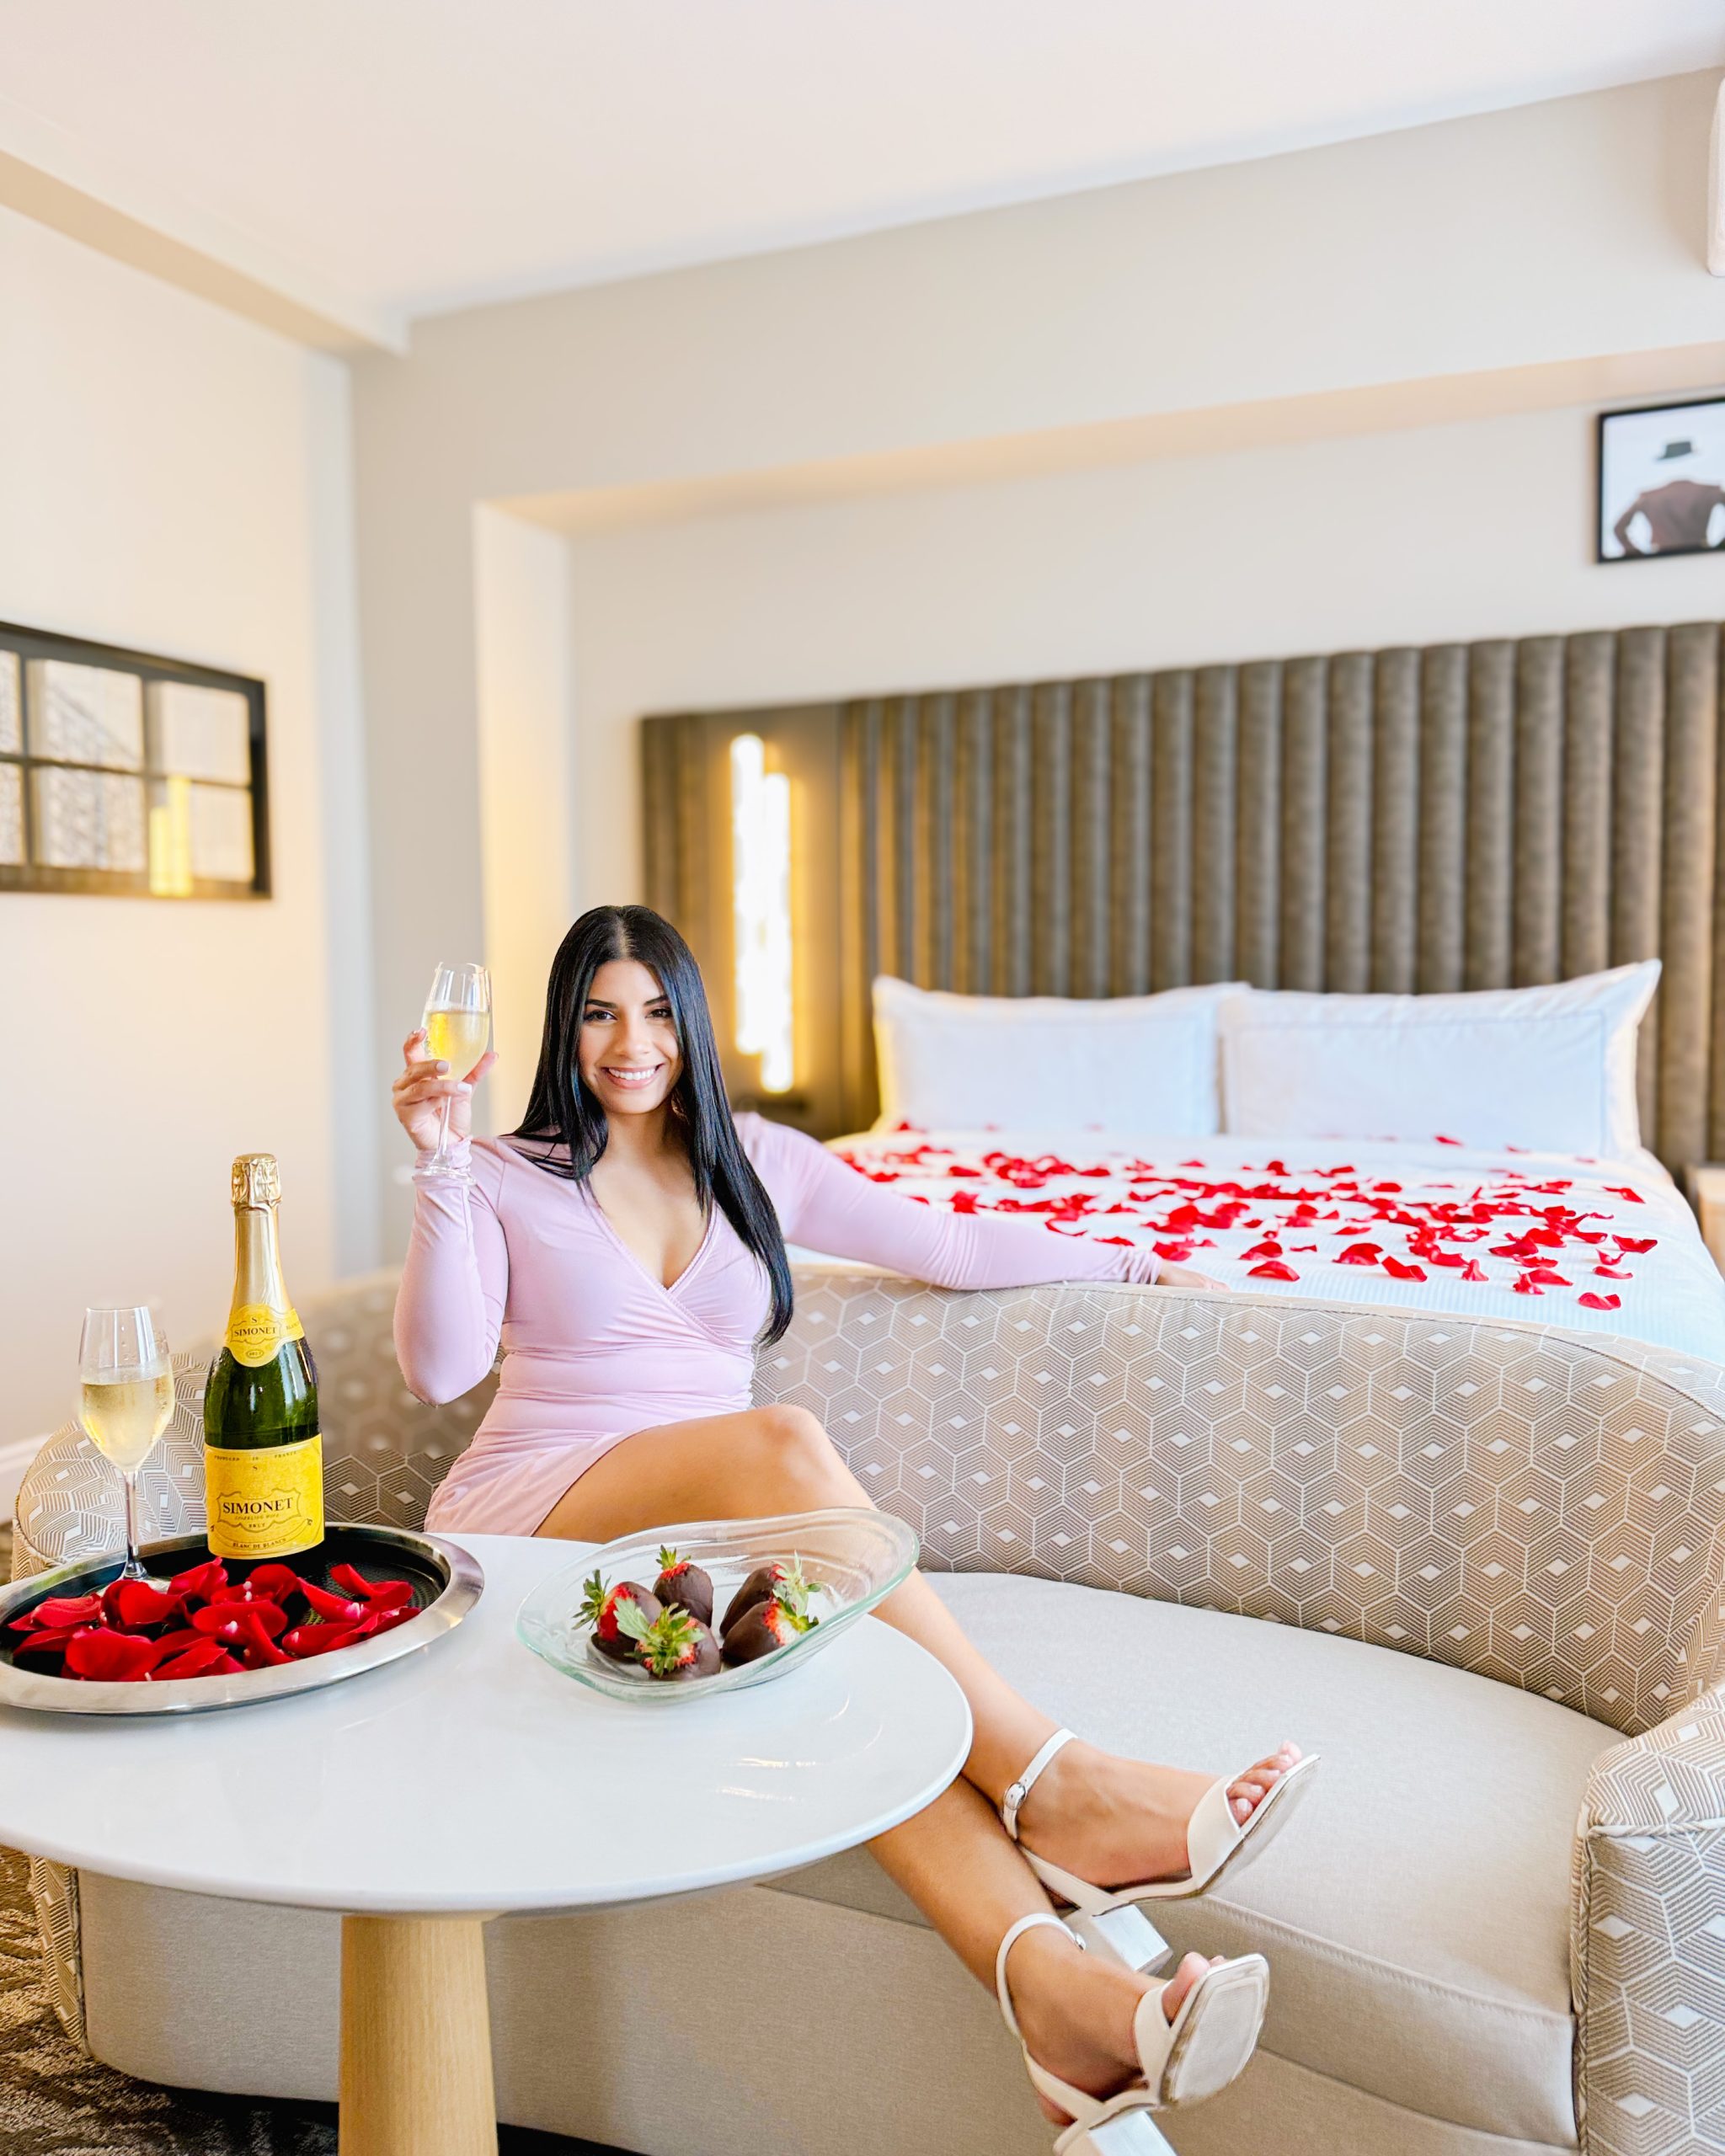 Celebrate Valentine’s Day in Elegance at Hotel Flor Tampa Downtown